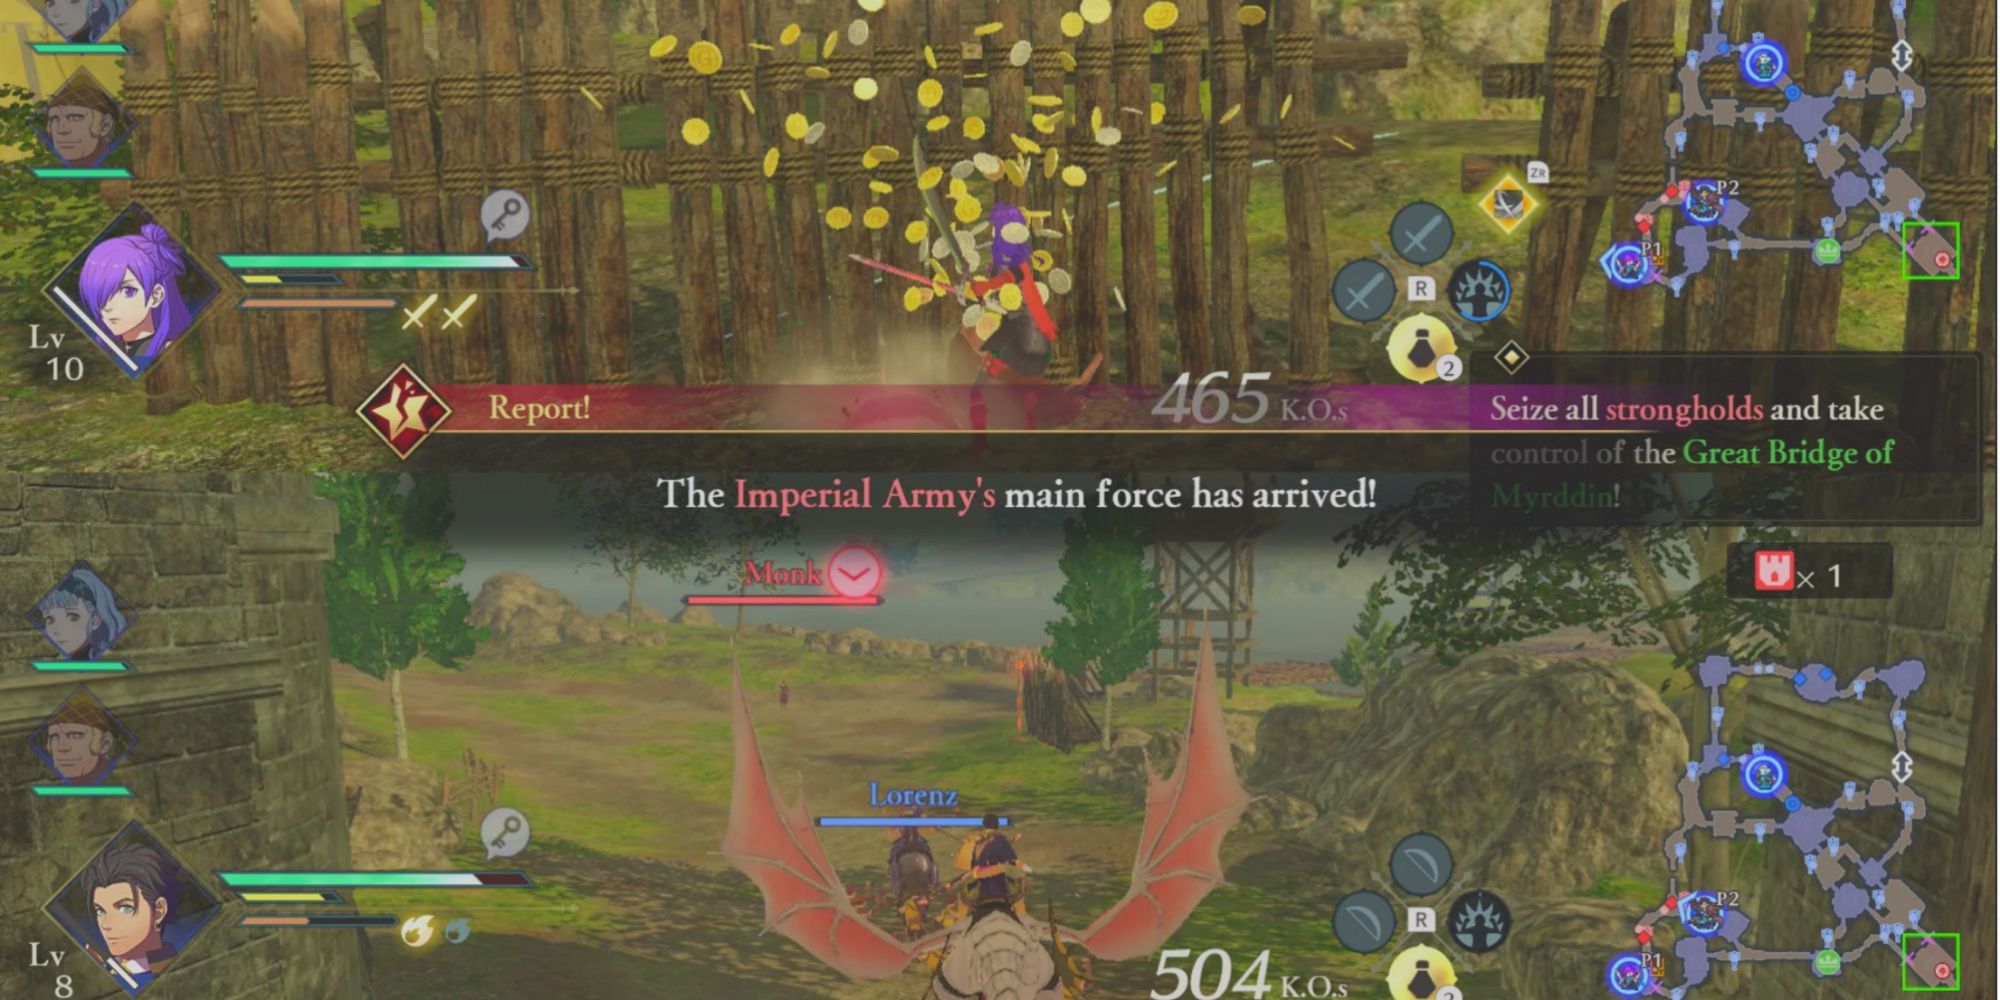 Shez breaks a red pot with gold at the top of the screen while Claude fights an enemy in the bottom half of the screen